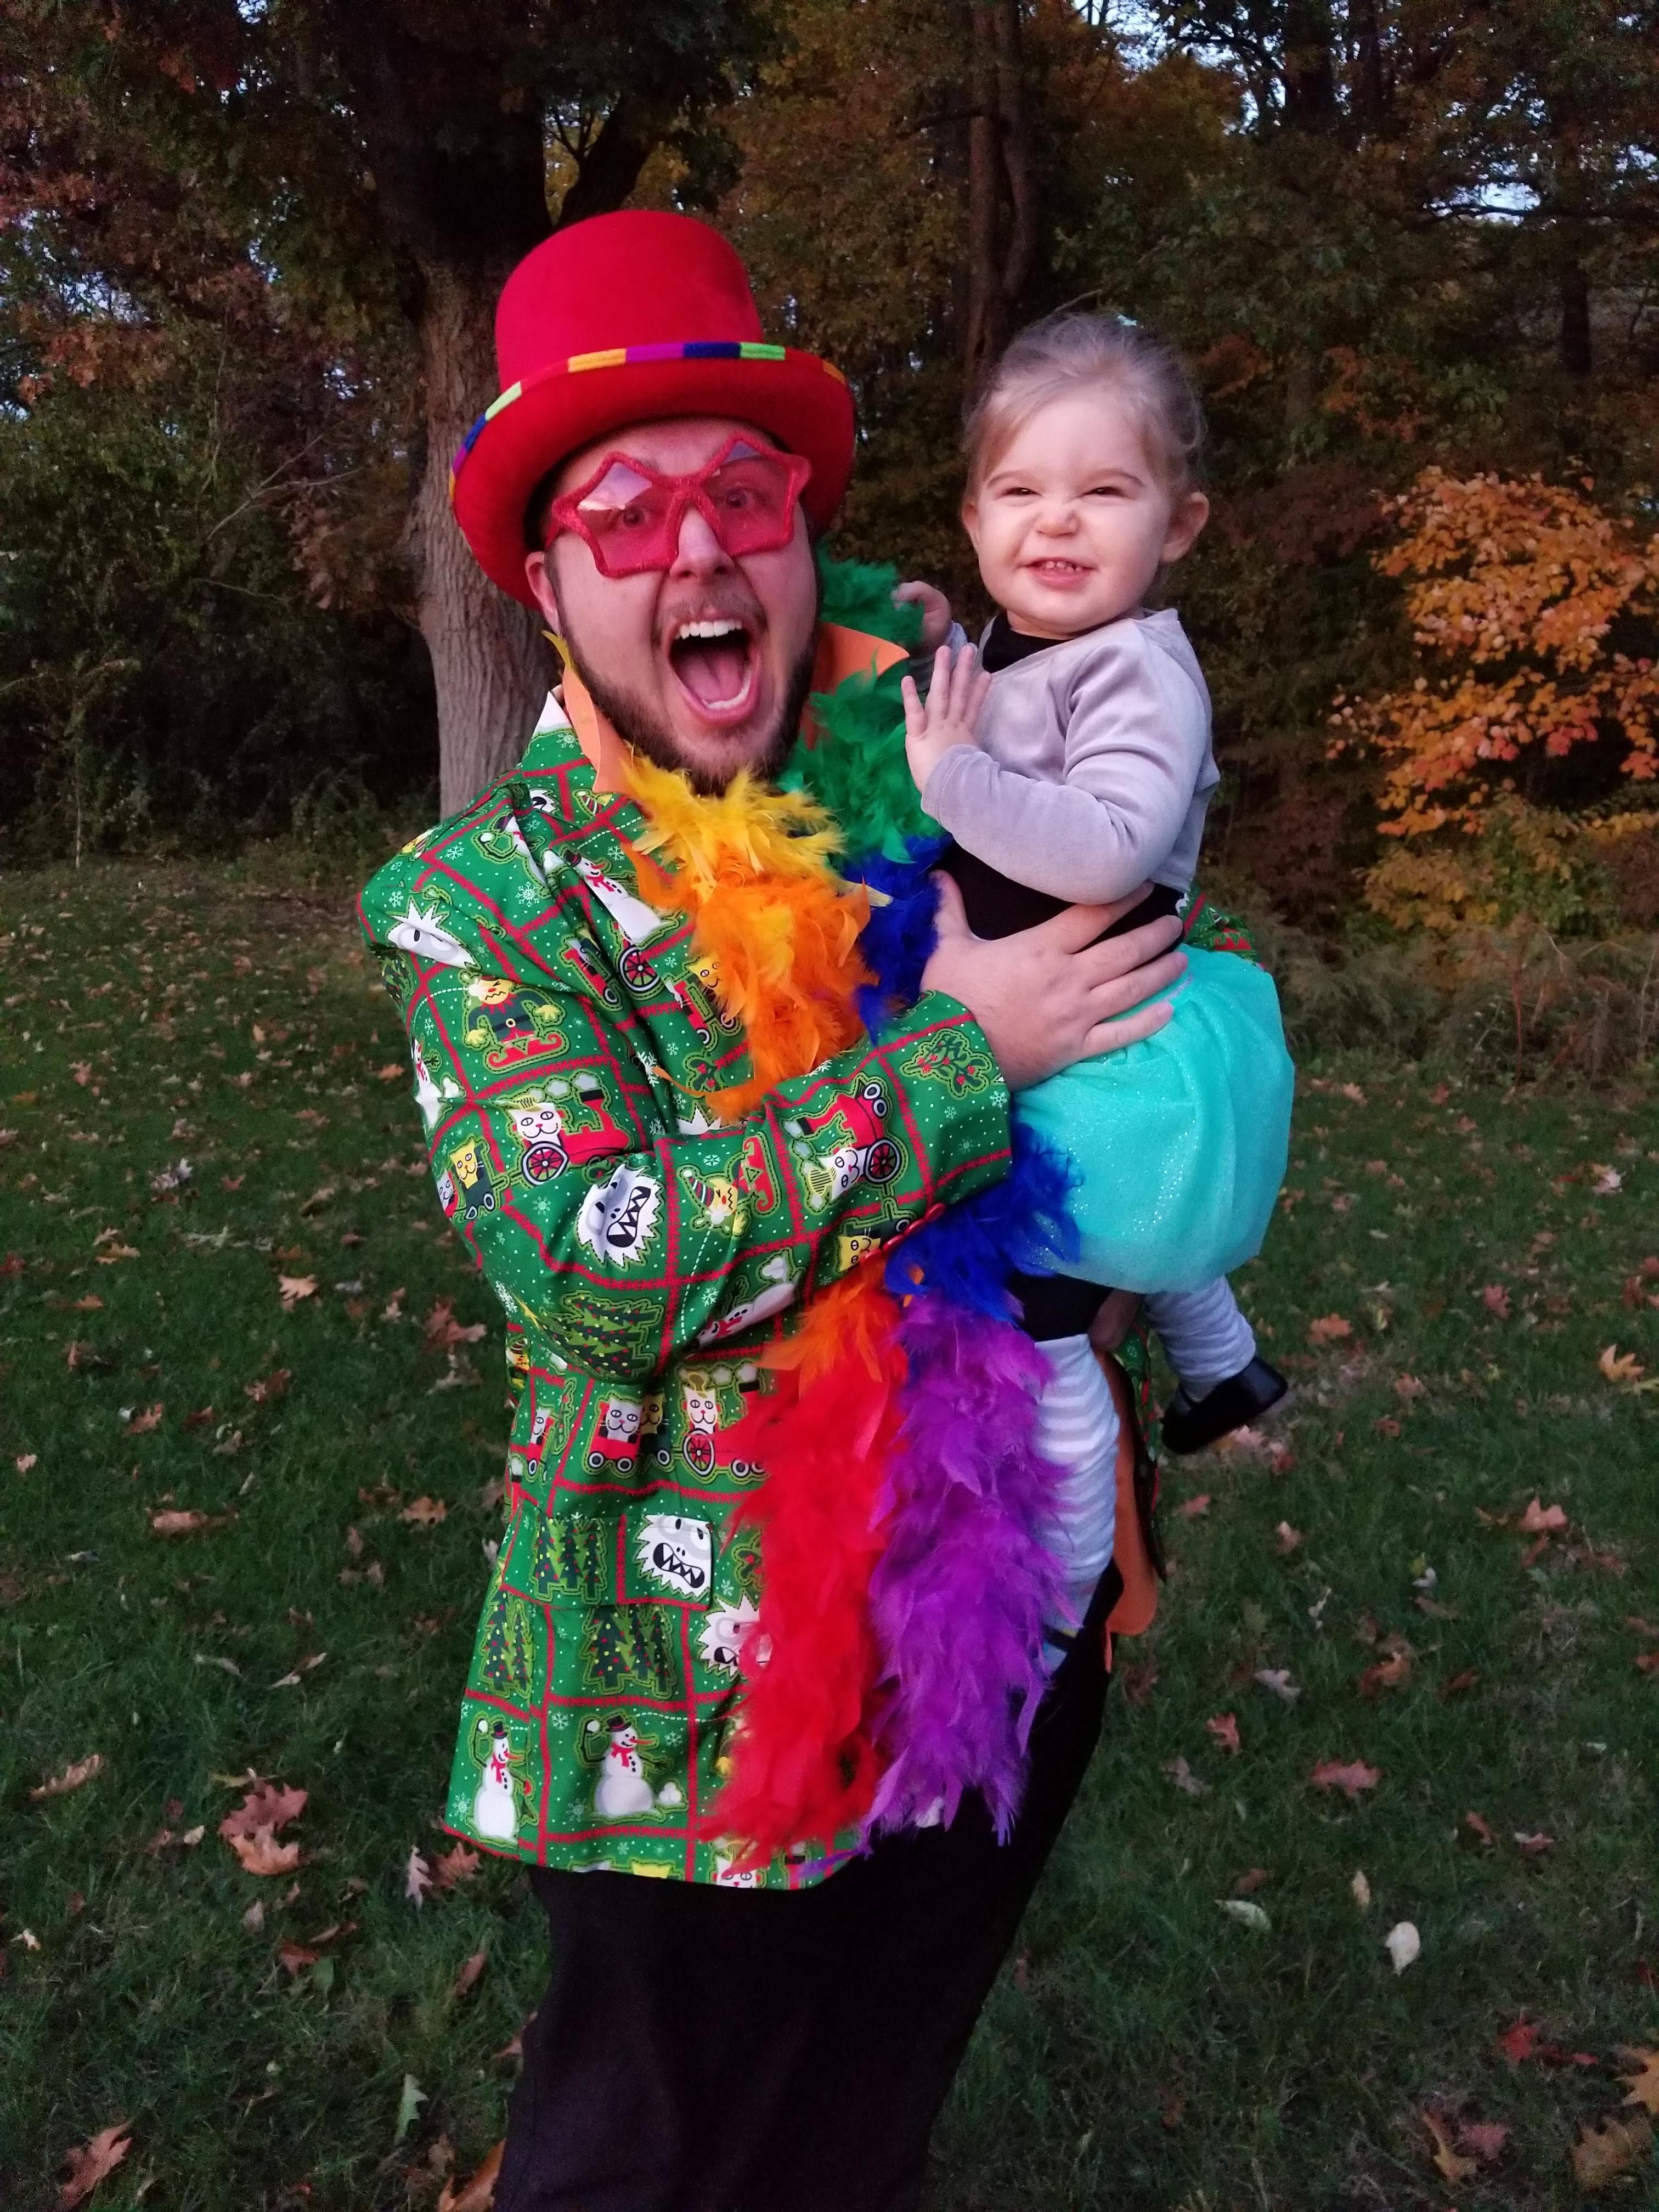 My daighter was a ballerina so I dressed up as Elton John and we went as Tiny Dancer for Halloween.